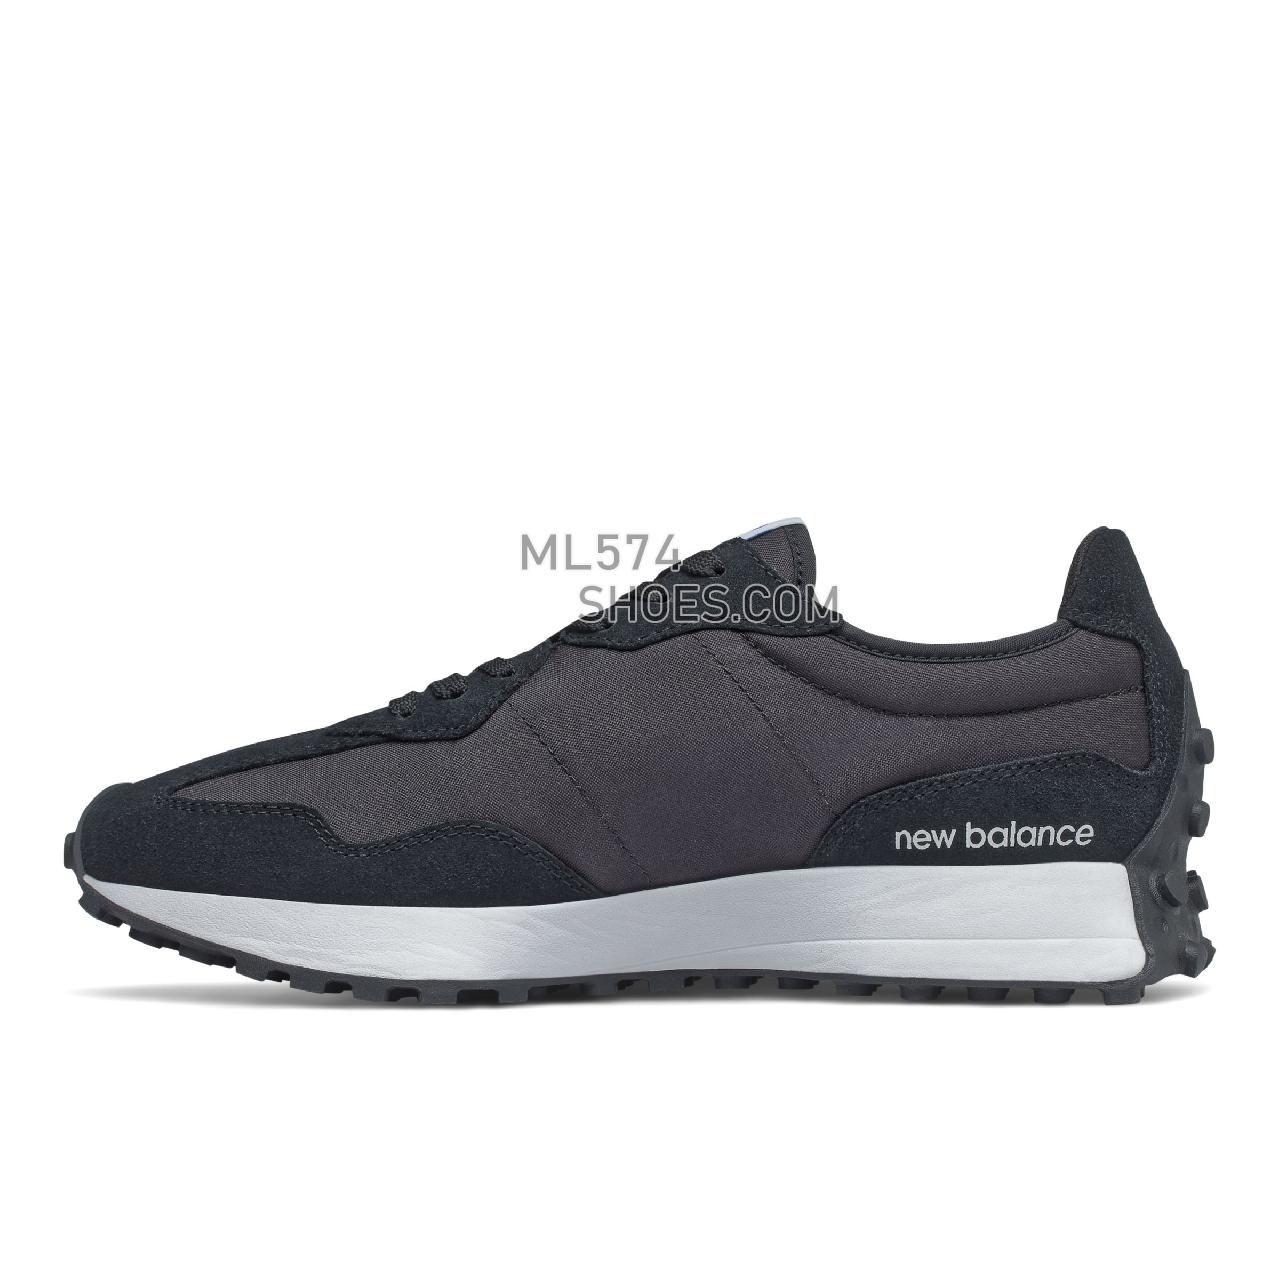 New Balance 327 - Unisex Men's Women's Sport Style Sneakers - Black with White - MS327CPG